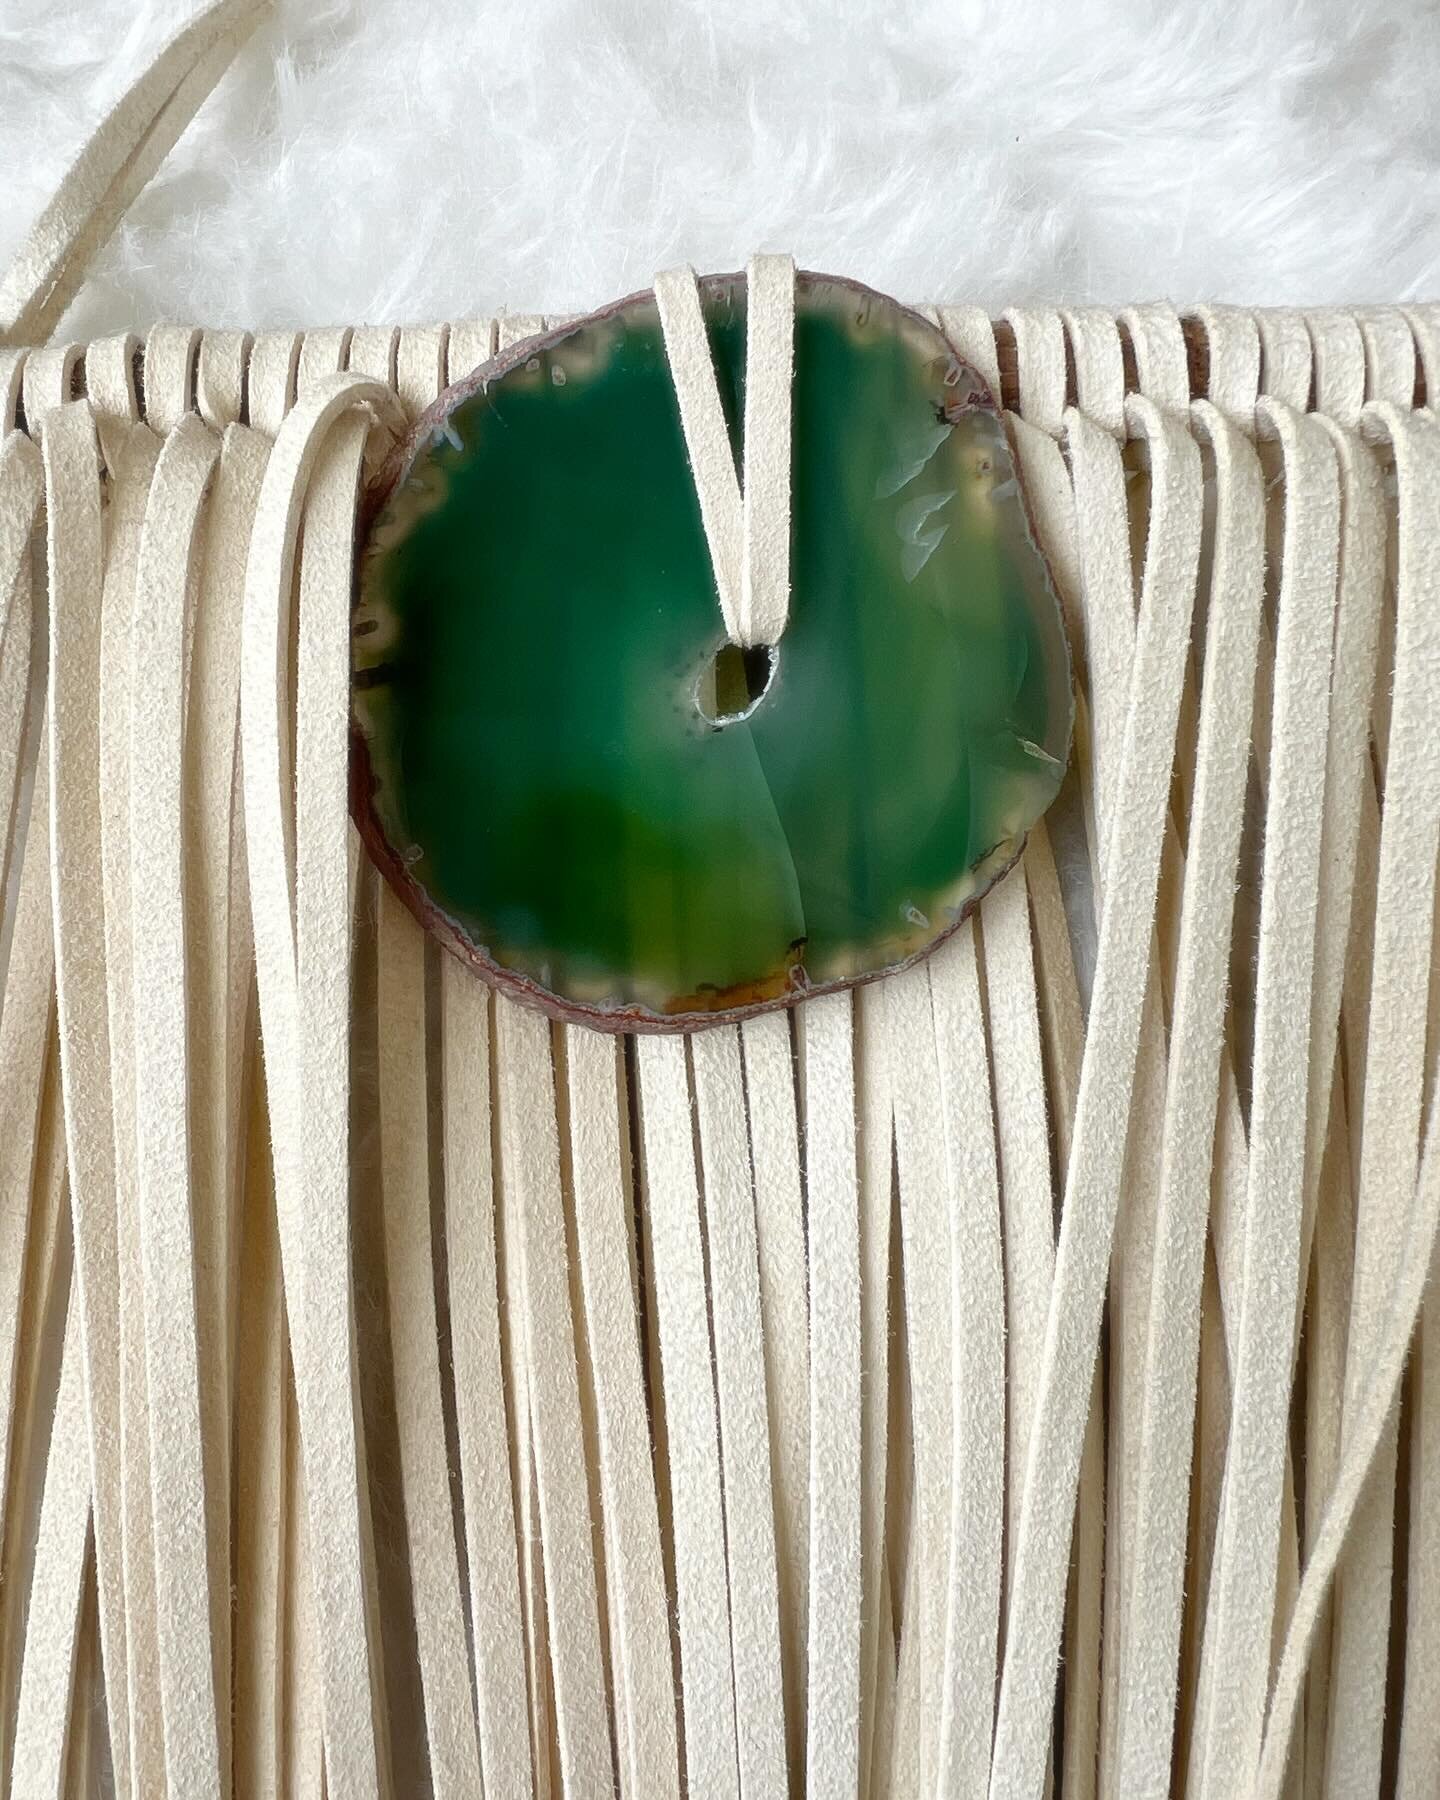 Feeling green! Happy St. Patrick&rsquo;s Day! 🍀

#green #greenagate #stpatricksday #lucky #stone